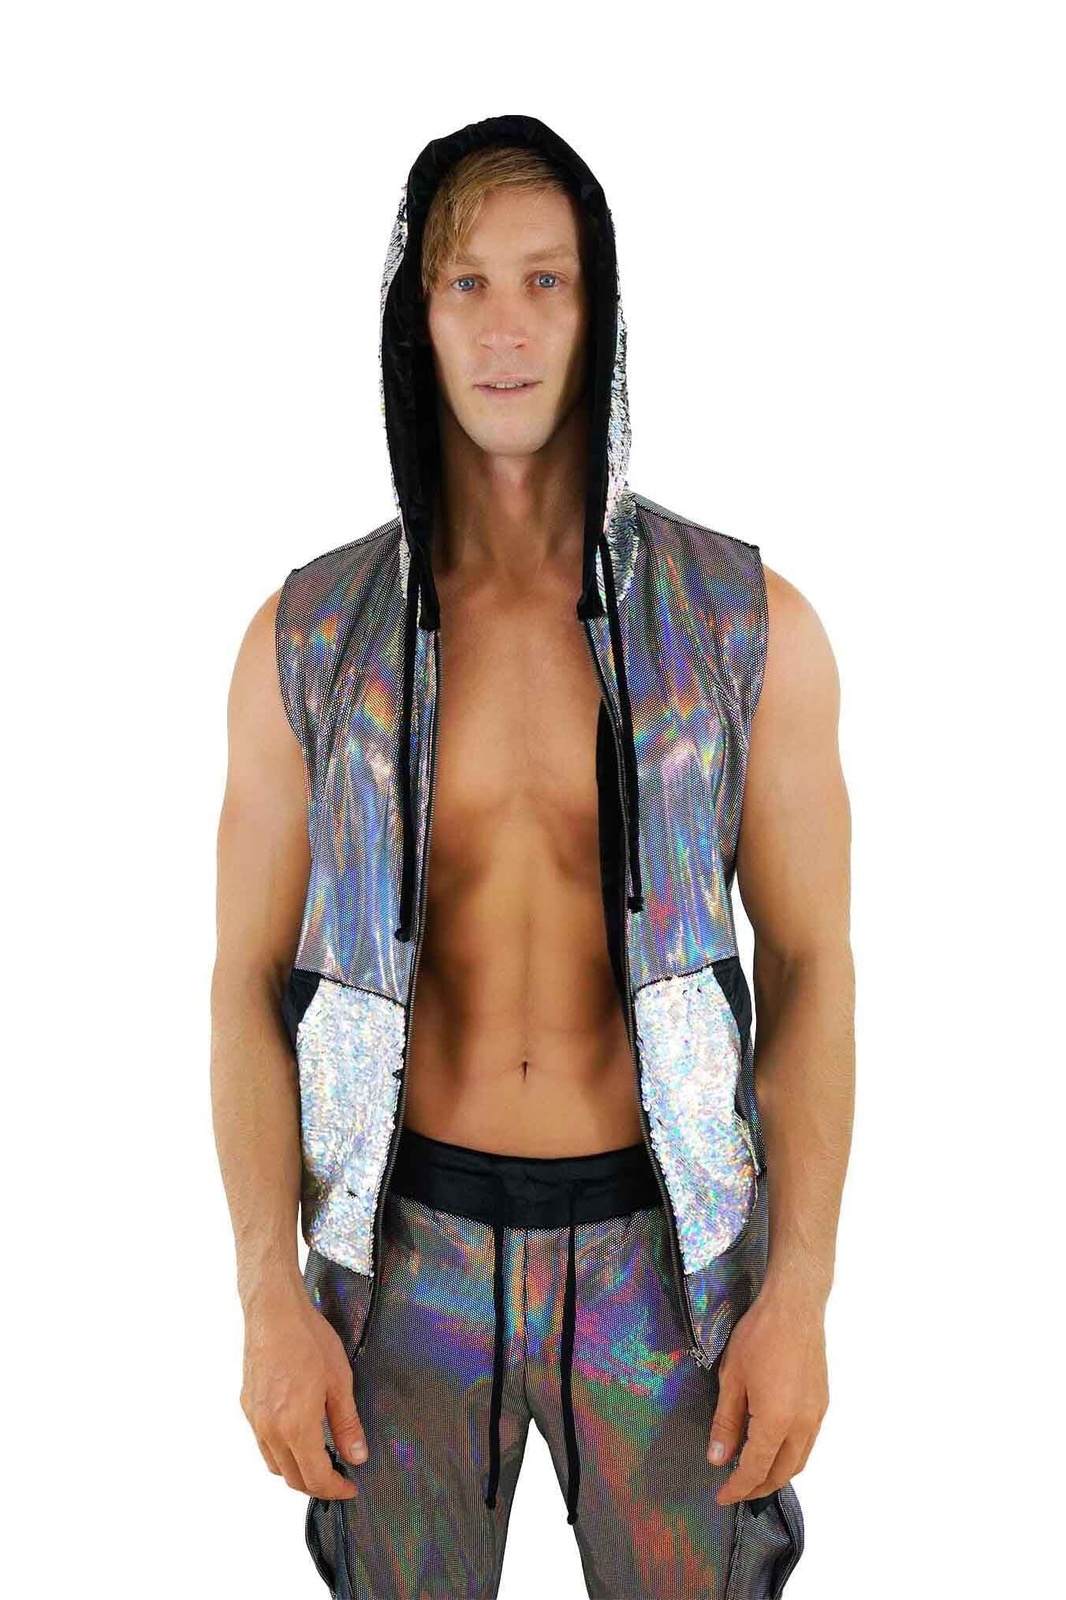 Mens Sleeveless hoodie rave vest with sequin hood from Love Khaos festival clothing website